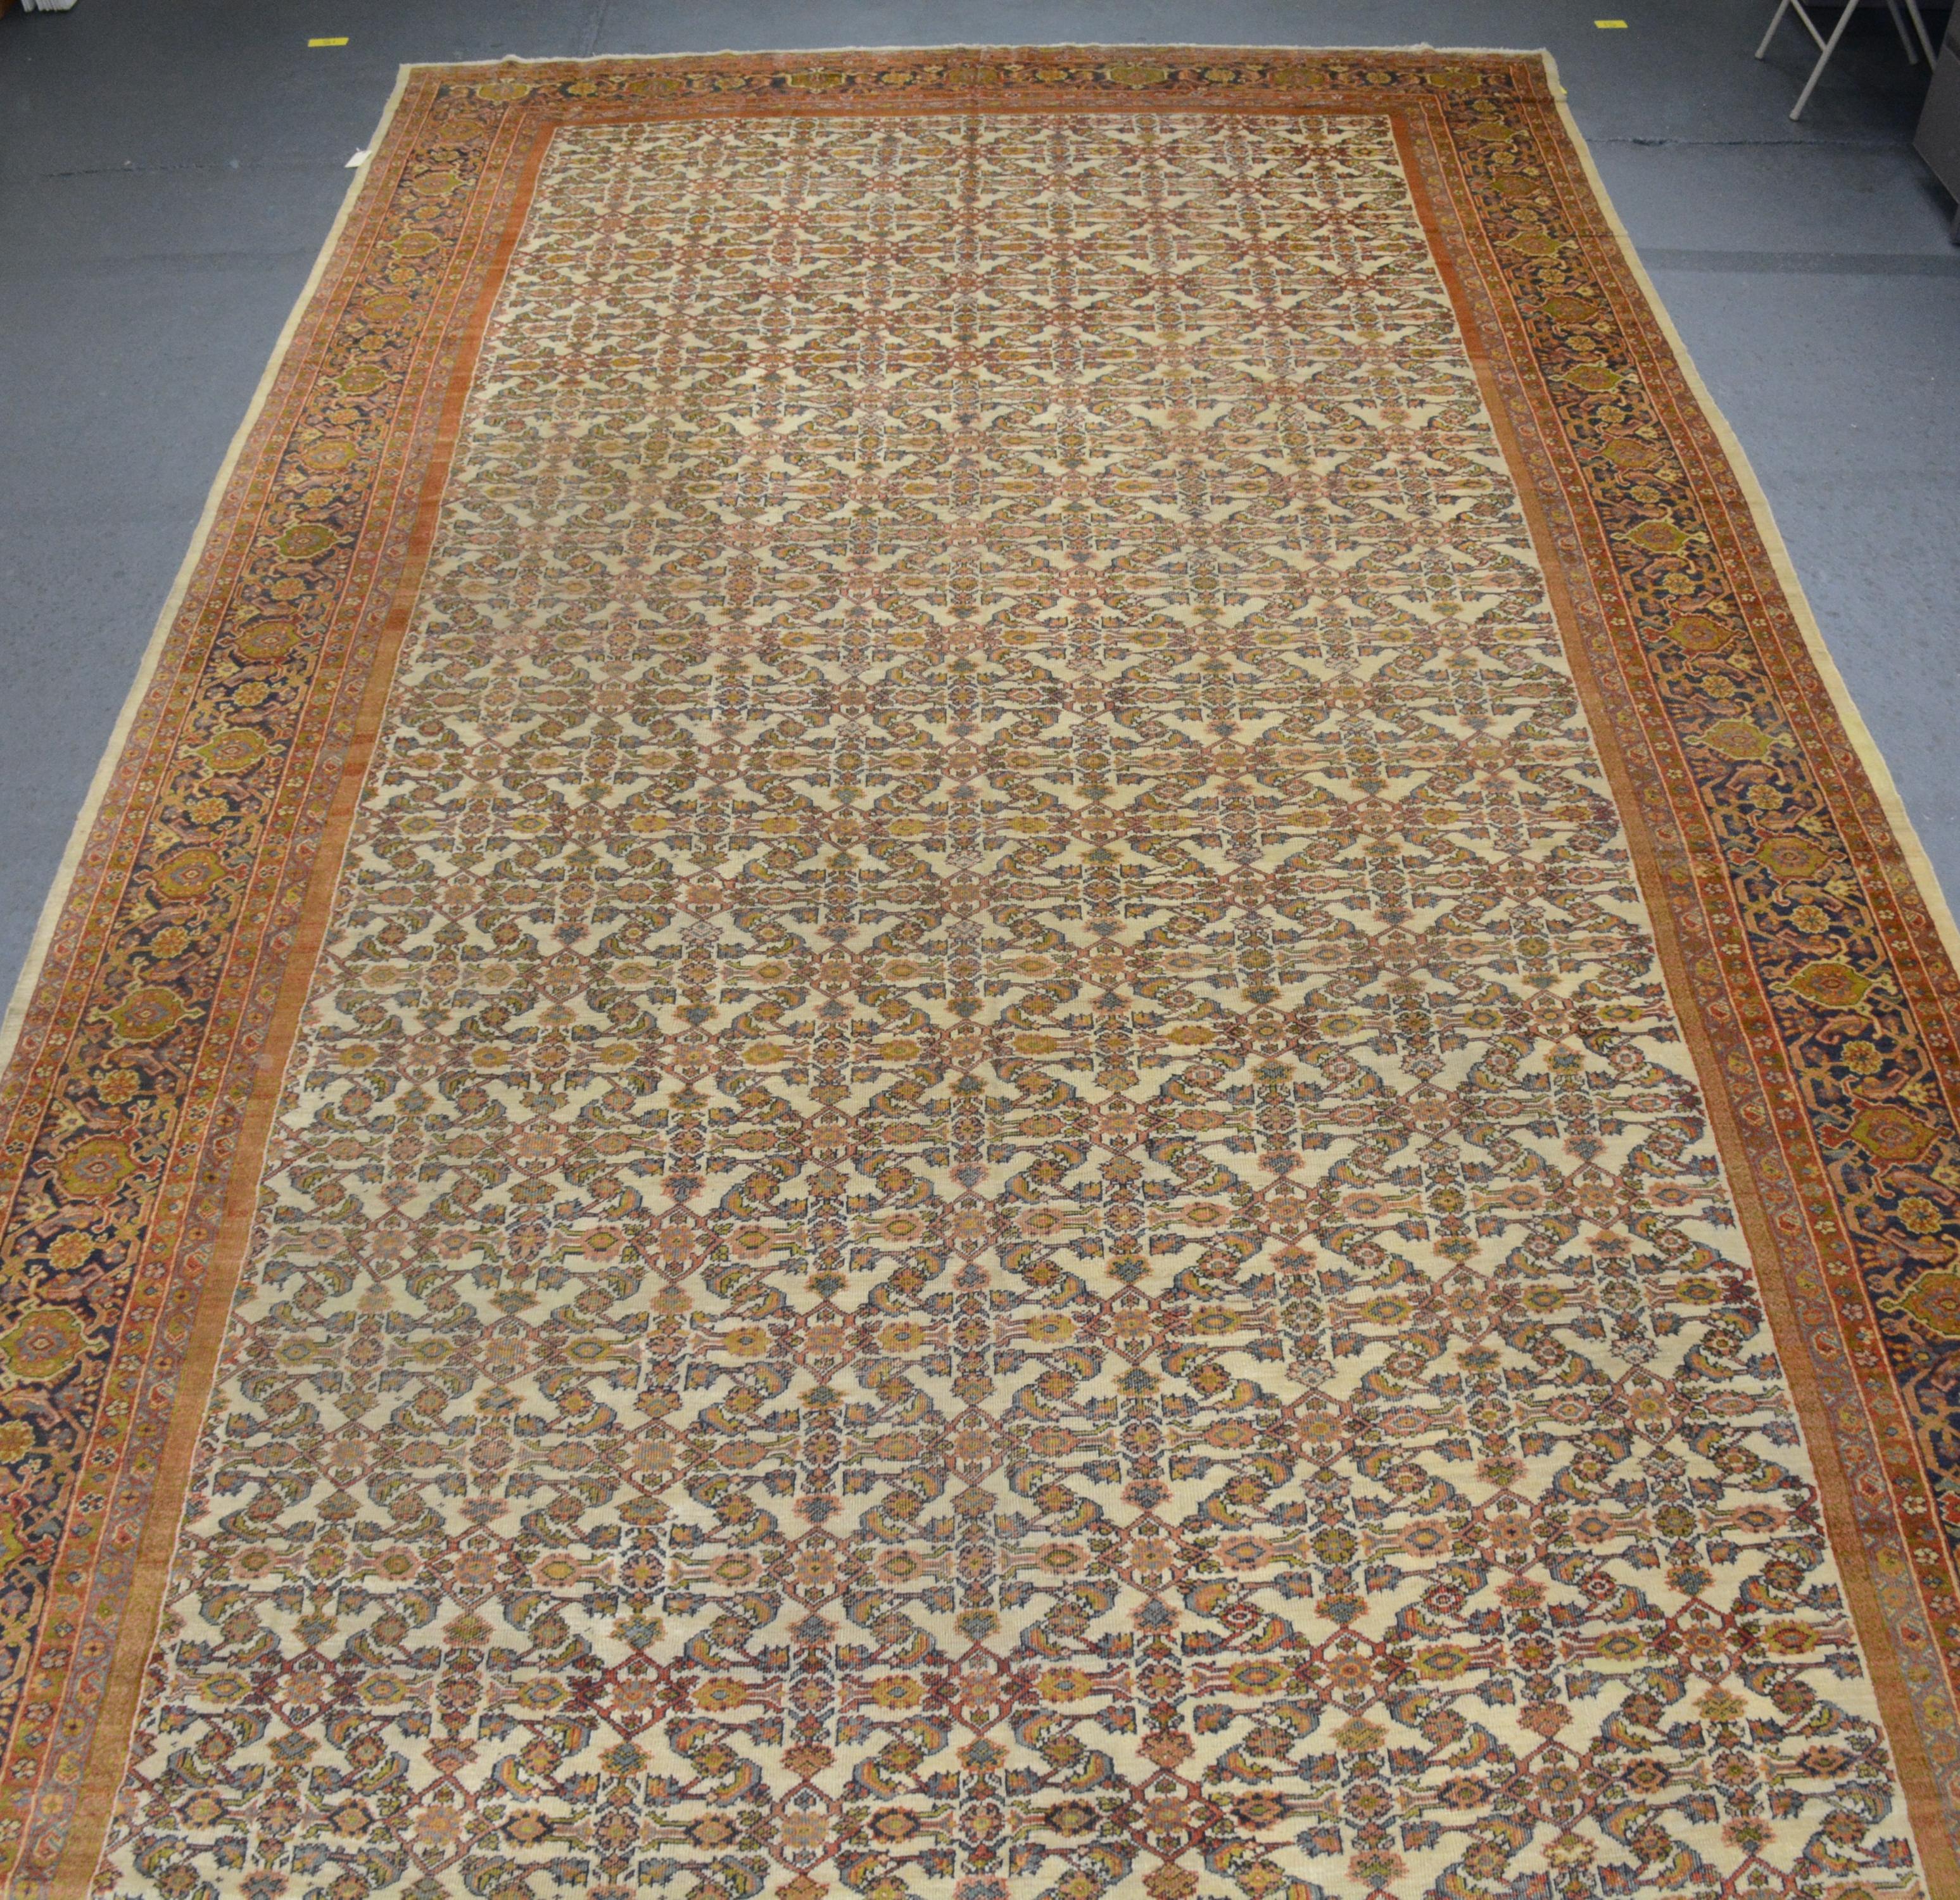 An antique Fereghan carpet from northern Persia, late 19th century, measuring 20' 0